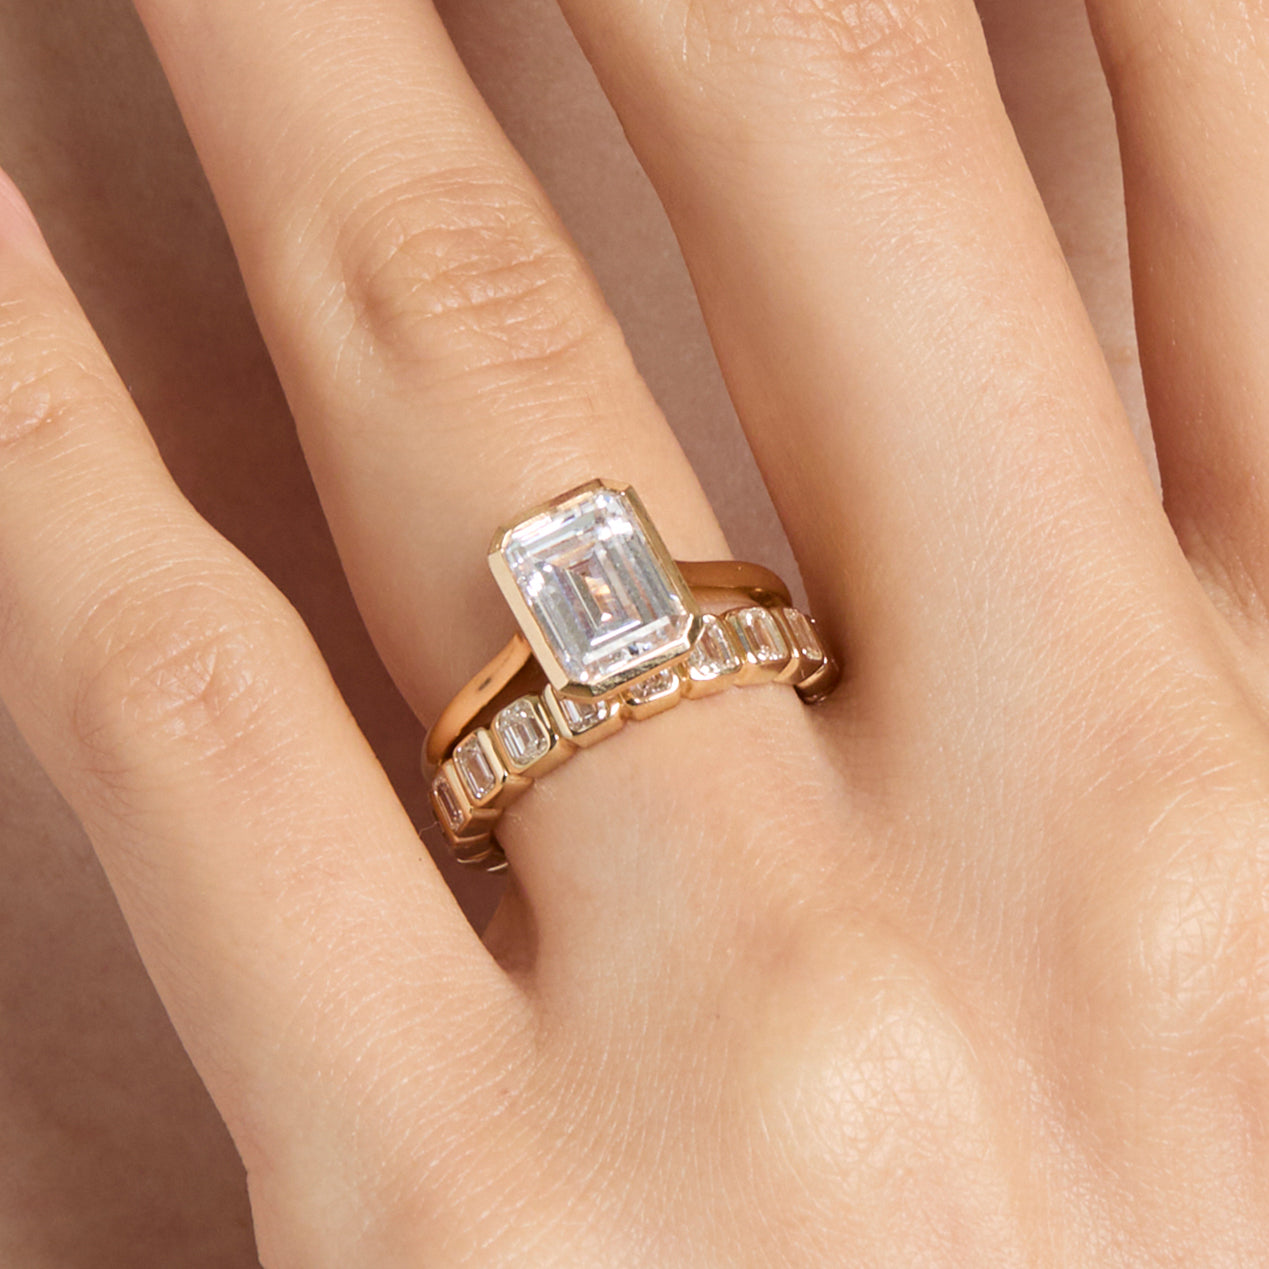 28 Gemstone Engagement Rings That Are Sure to Stand Out - Wed Vibes